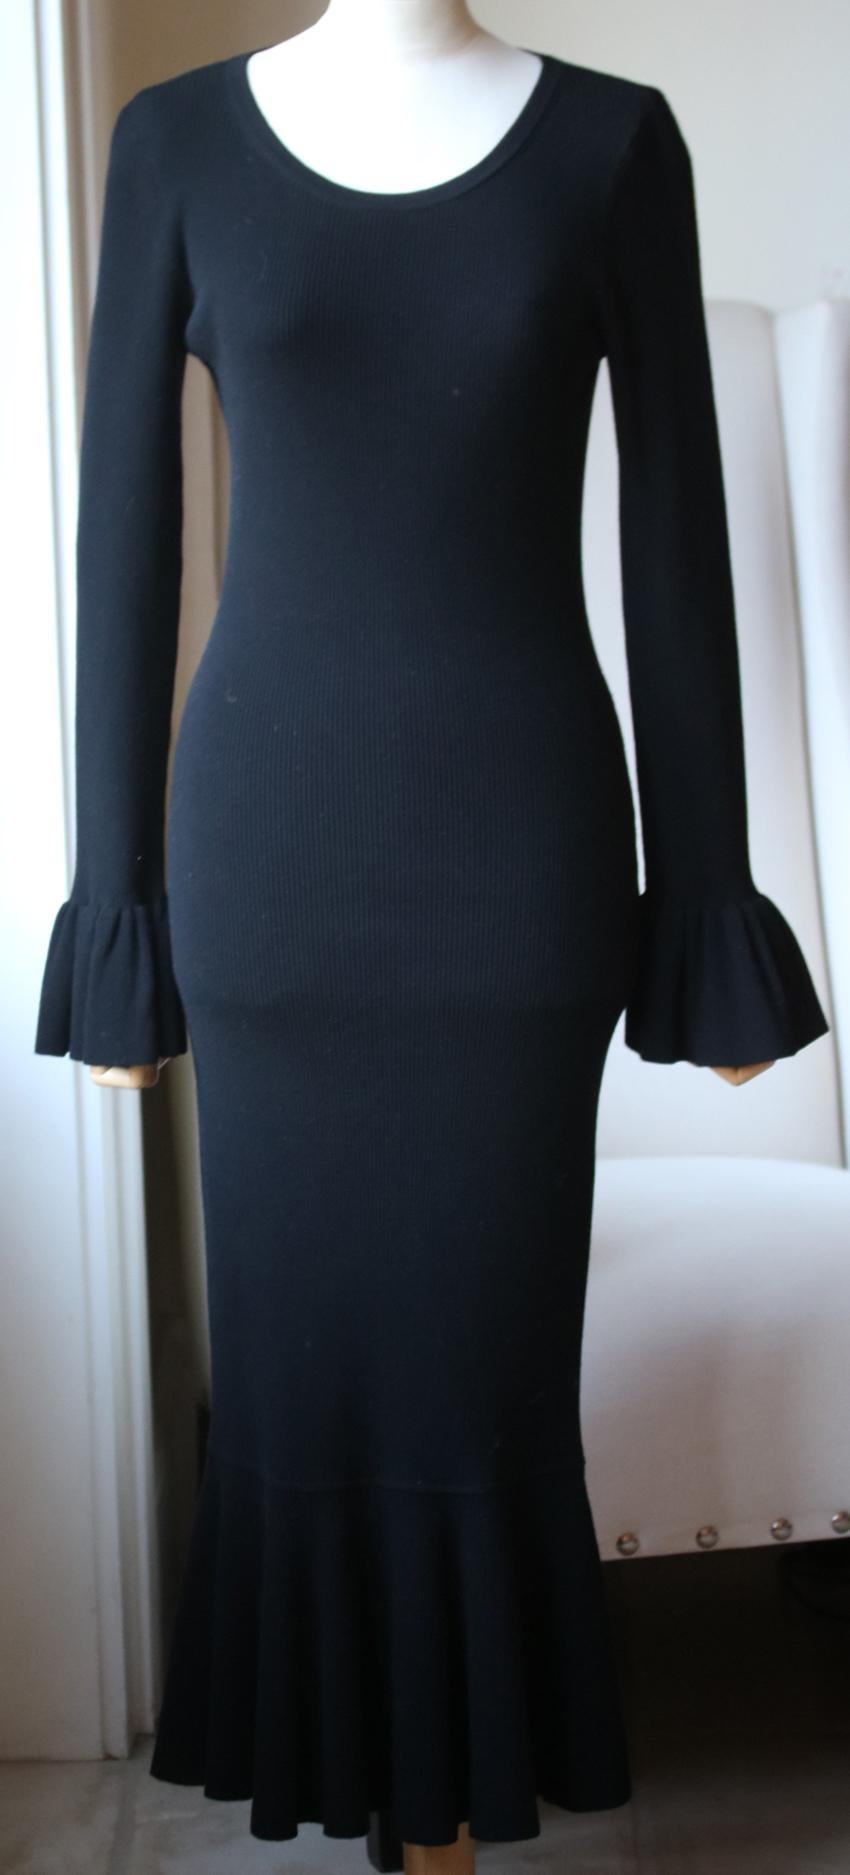 This midi dress is made from ribbed stretch-knit for a body-sculpting fit defined with pretty ruffled edges. Black ribbed stretch-knit. Slips on. 82% viscose, 18% polyester. 

Size: Medium (UK 10, US 6, FR 38, IT 42)

Condition: As new condition, no